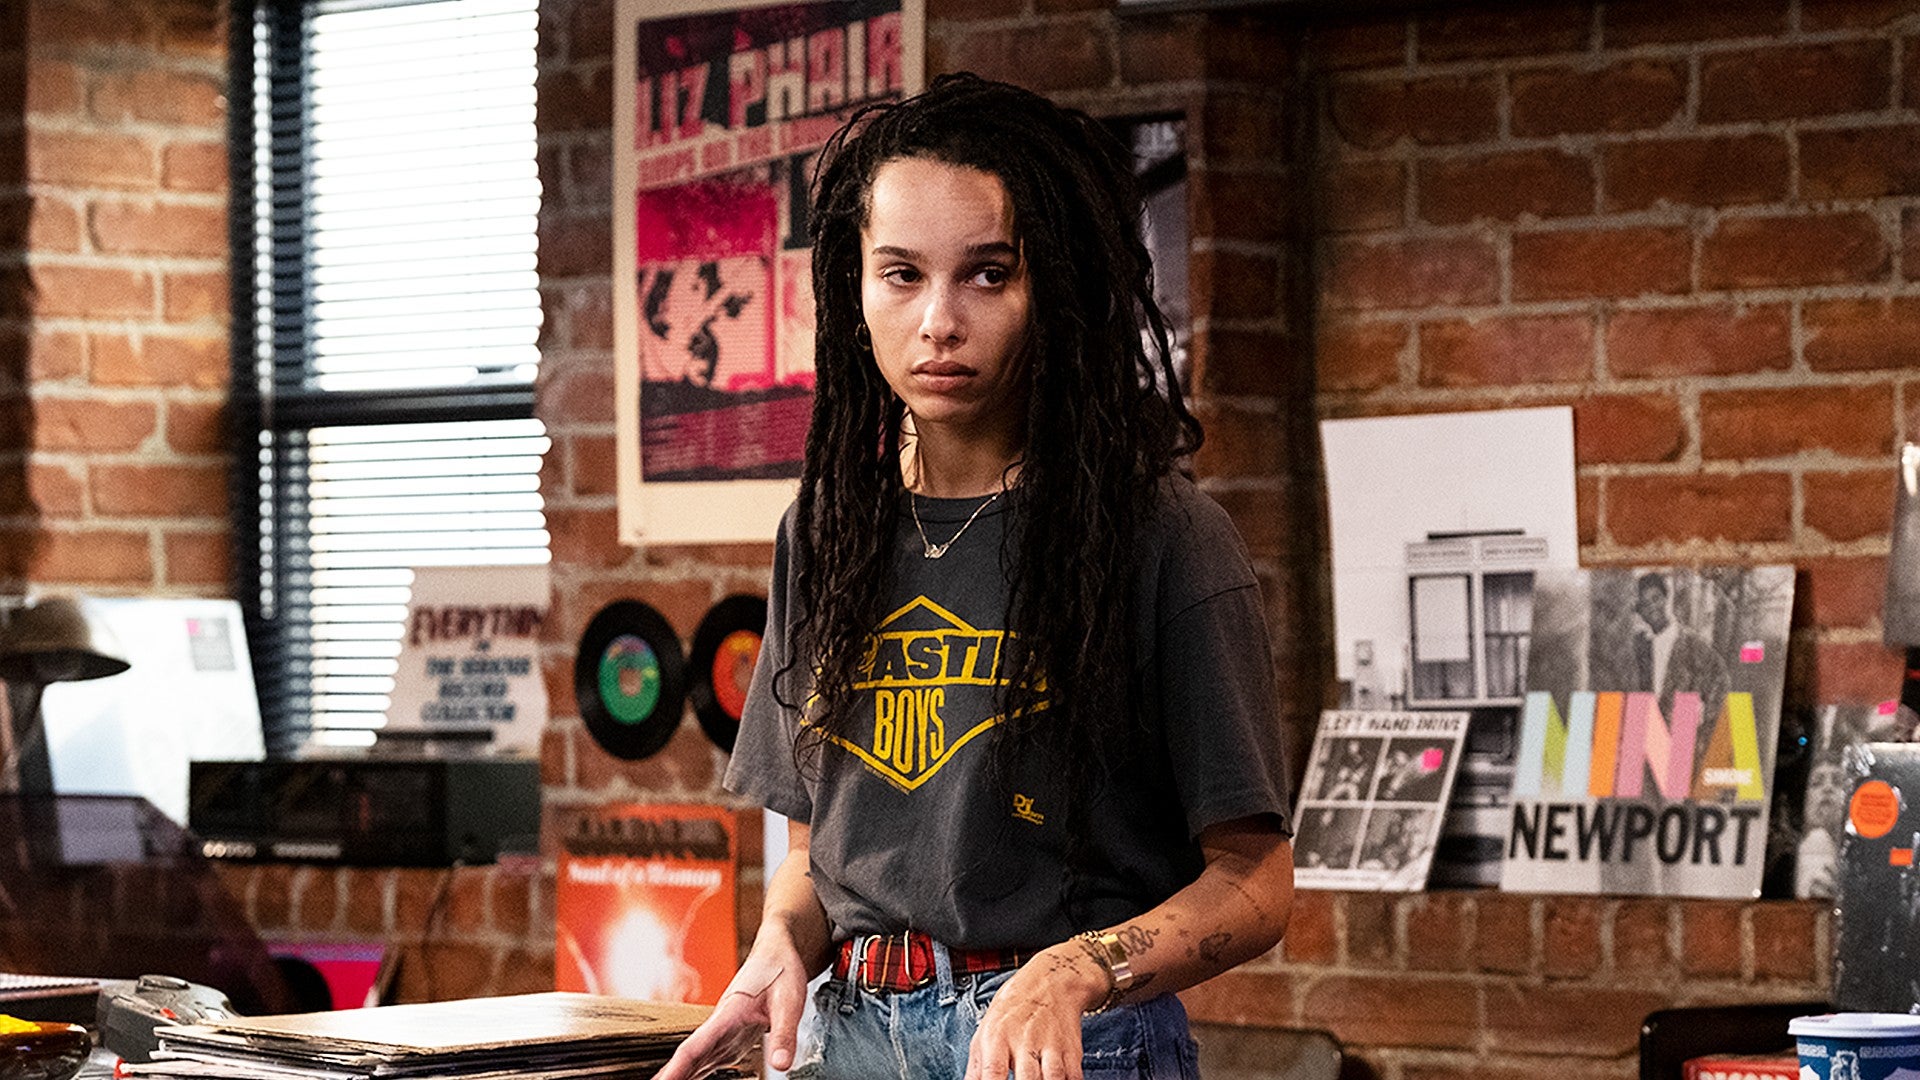 House ambassador Zoë Kravitz gives new meaning to “cat woman” in Tiffa